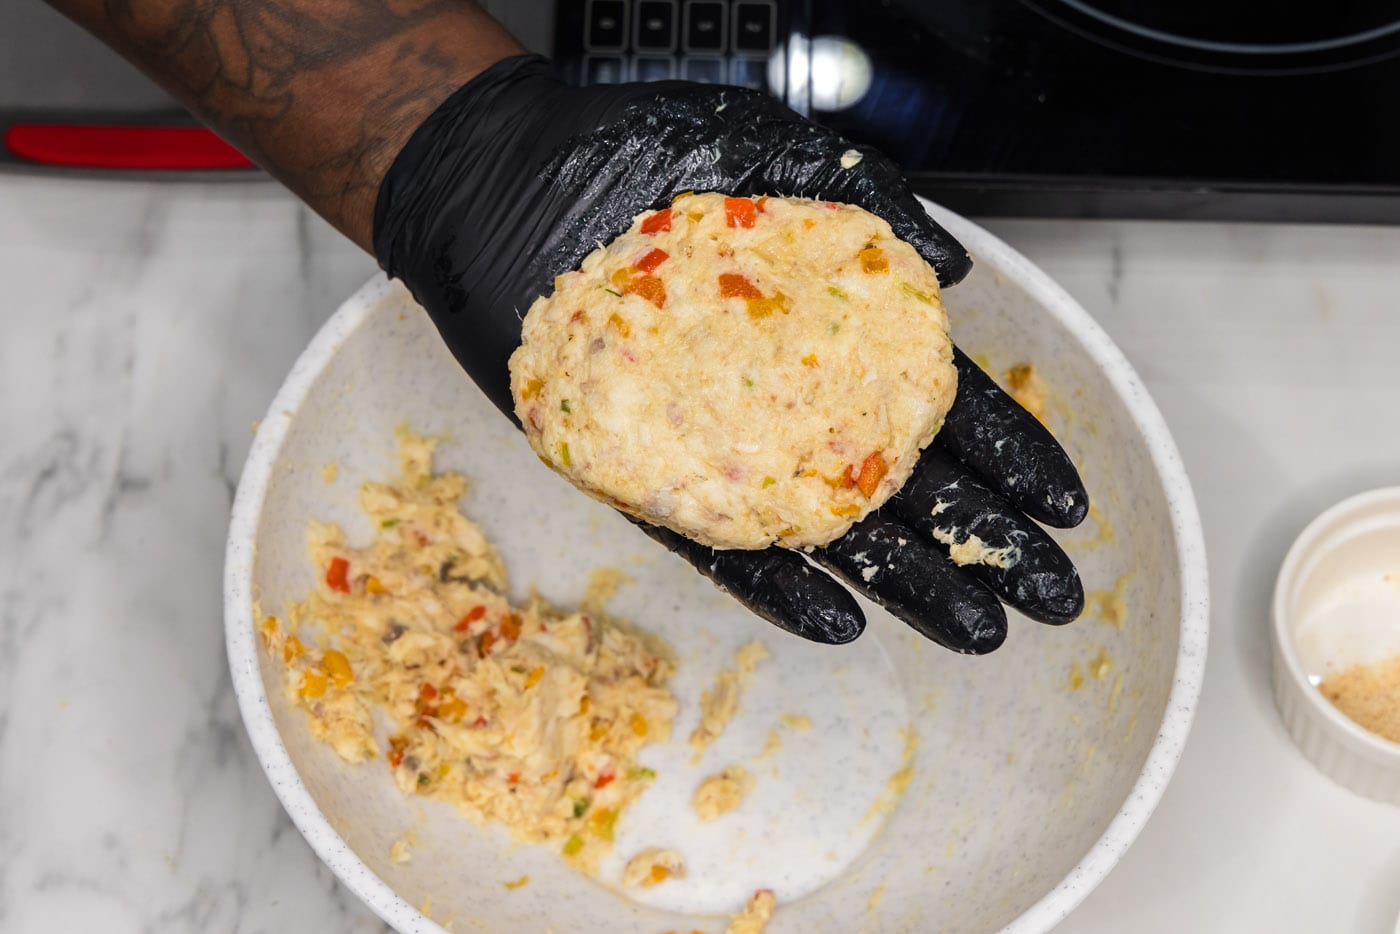 forming fish mixture into a patty with gloved hands